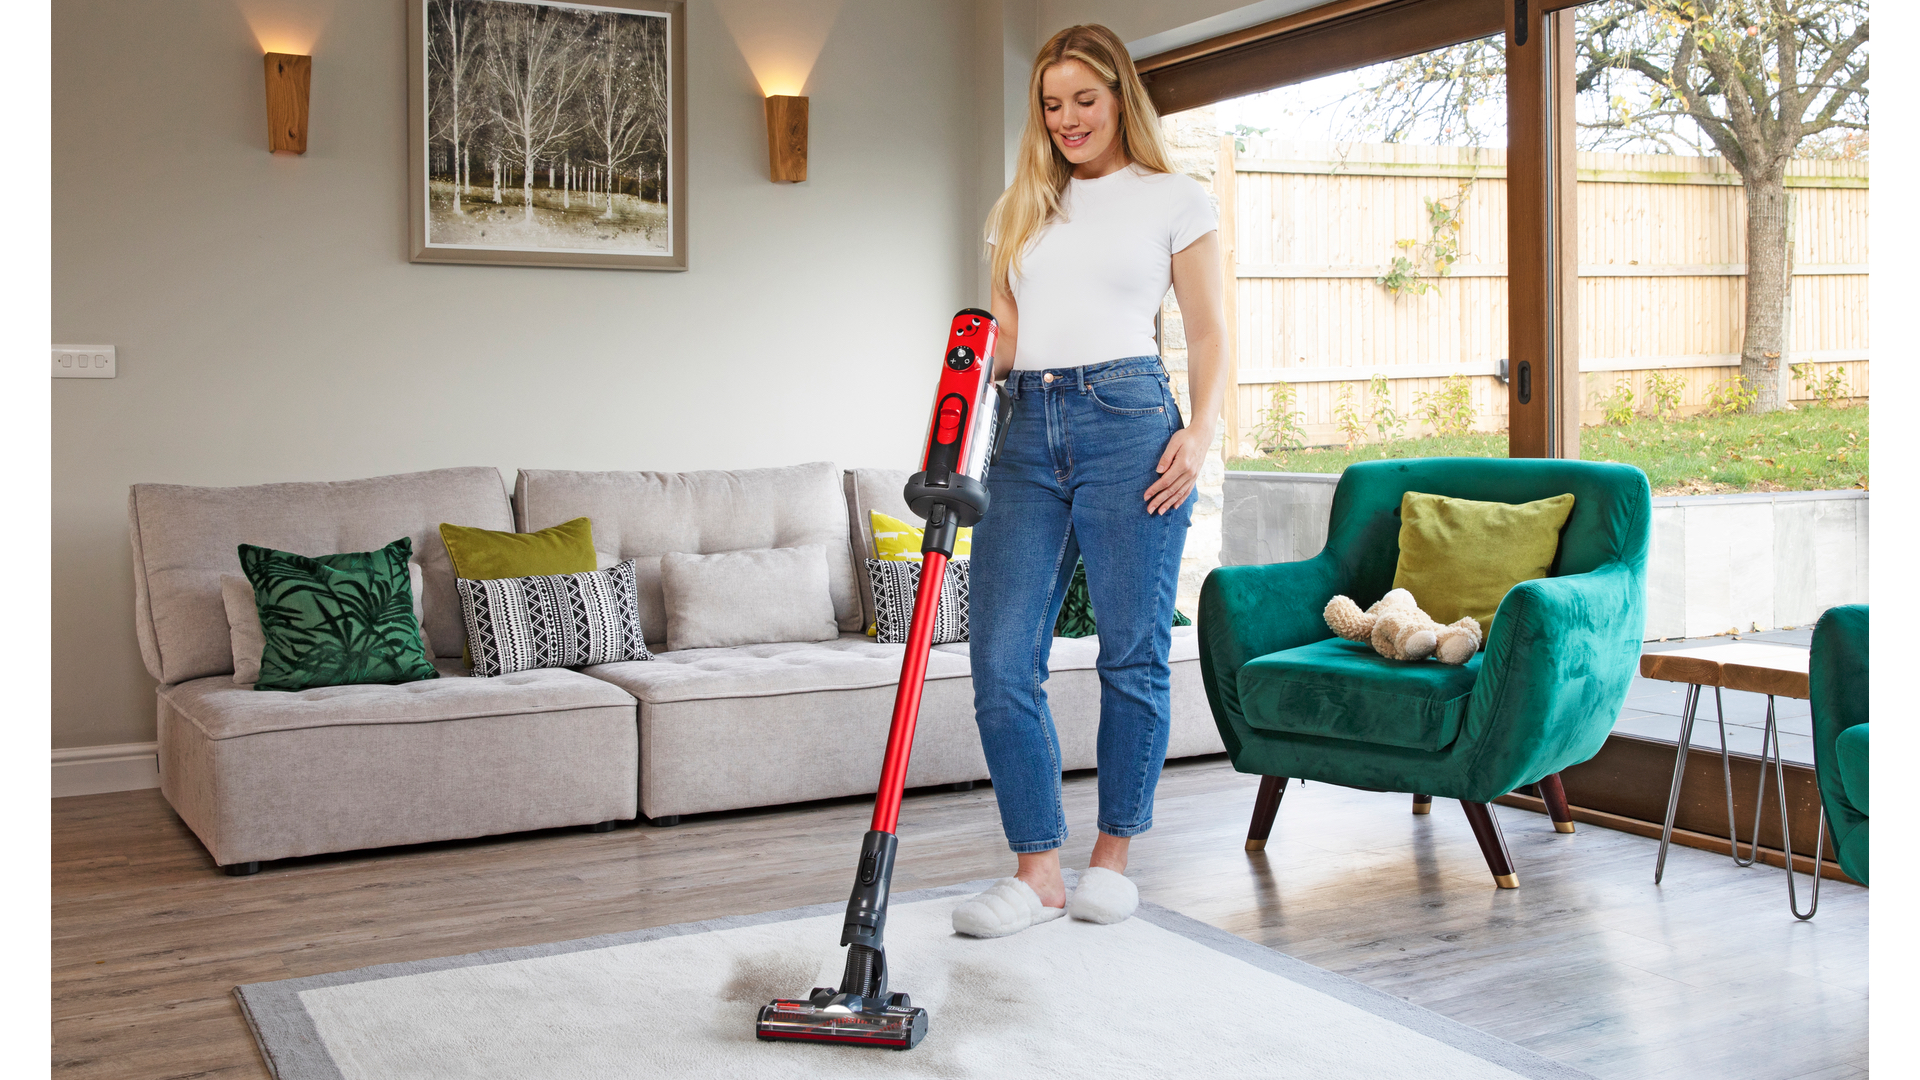 The Henry Hoover Range - Which is the Best Henry Hoover?